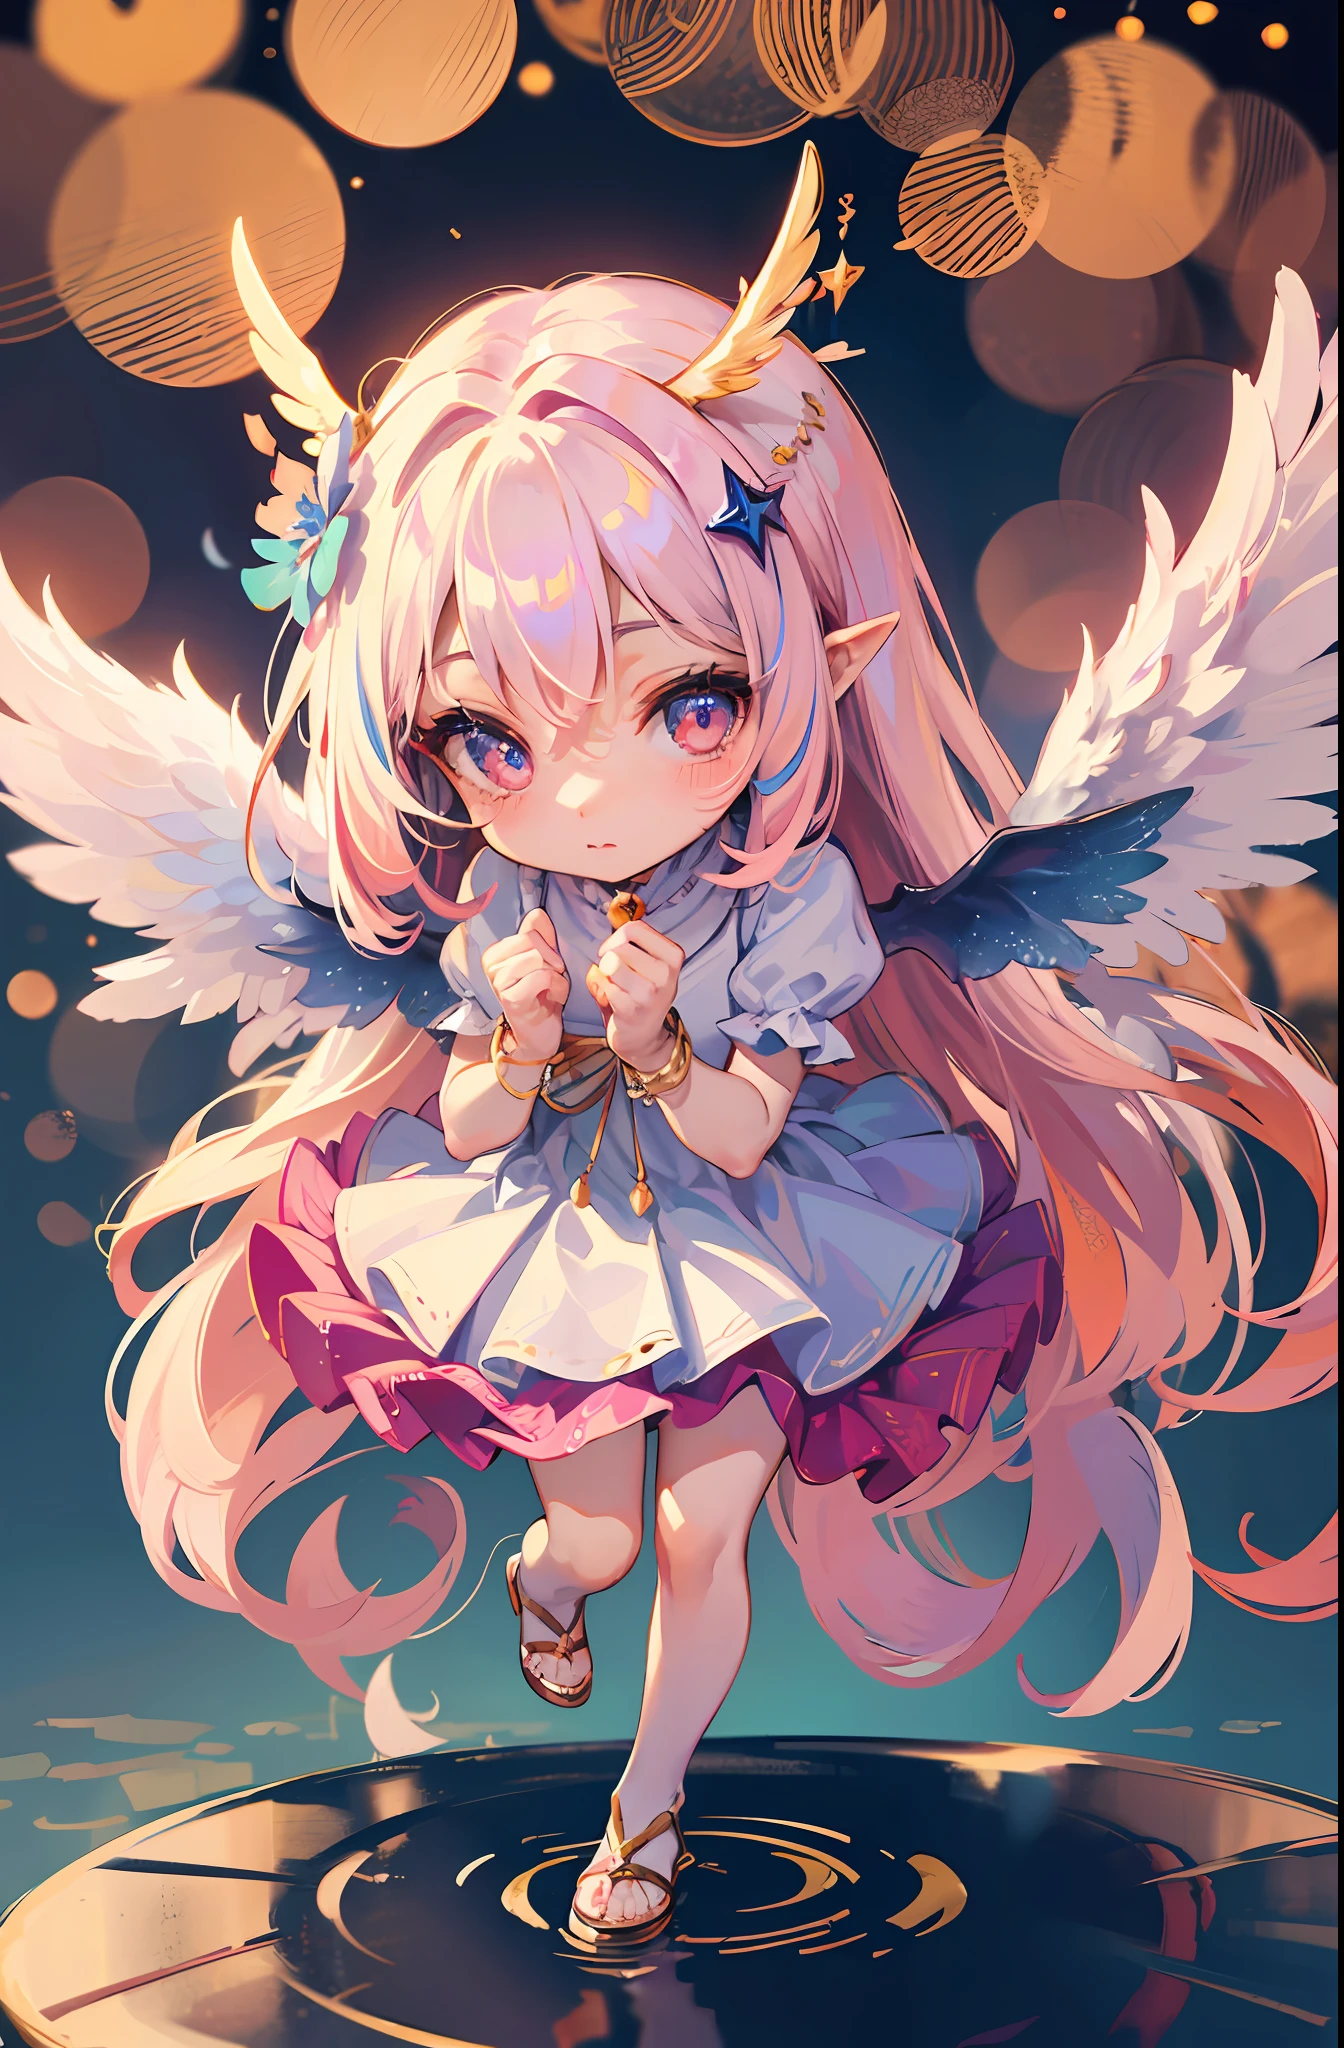 (Chibi: 1.2), (Masterpiece: 1.4), (Best Quality: 1.4), (Very Cute Angel Girl, Super Detailed Face, Jewel-like Eyes, White Very Long Hair, Colorful Gradient Hair: 1.4), (Angel Ring:
1.4), (Angel Wings: 1.4), (Full body, perfect 2 arms, perfect 2 legs: 1.4), (Perfect 4 fingers: 1 thumb), light, shine, bokeh, super fine